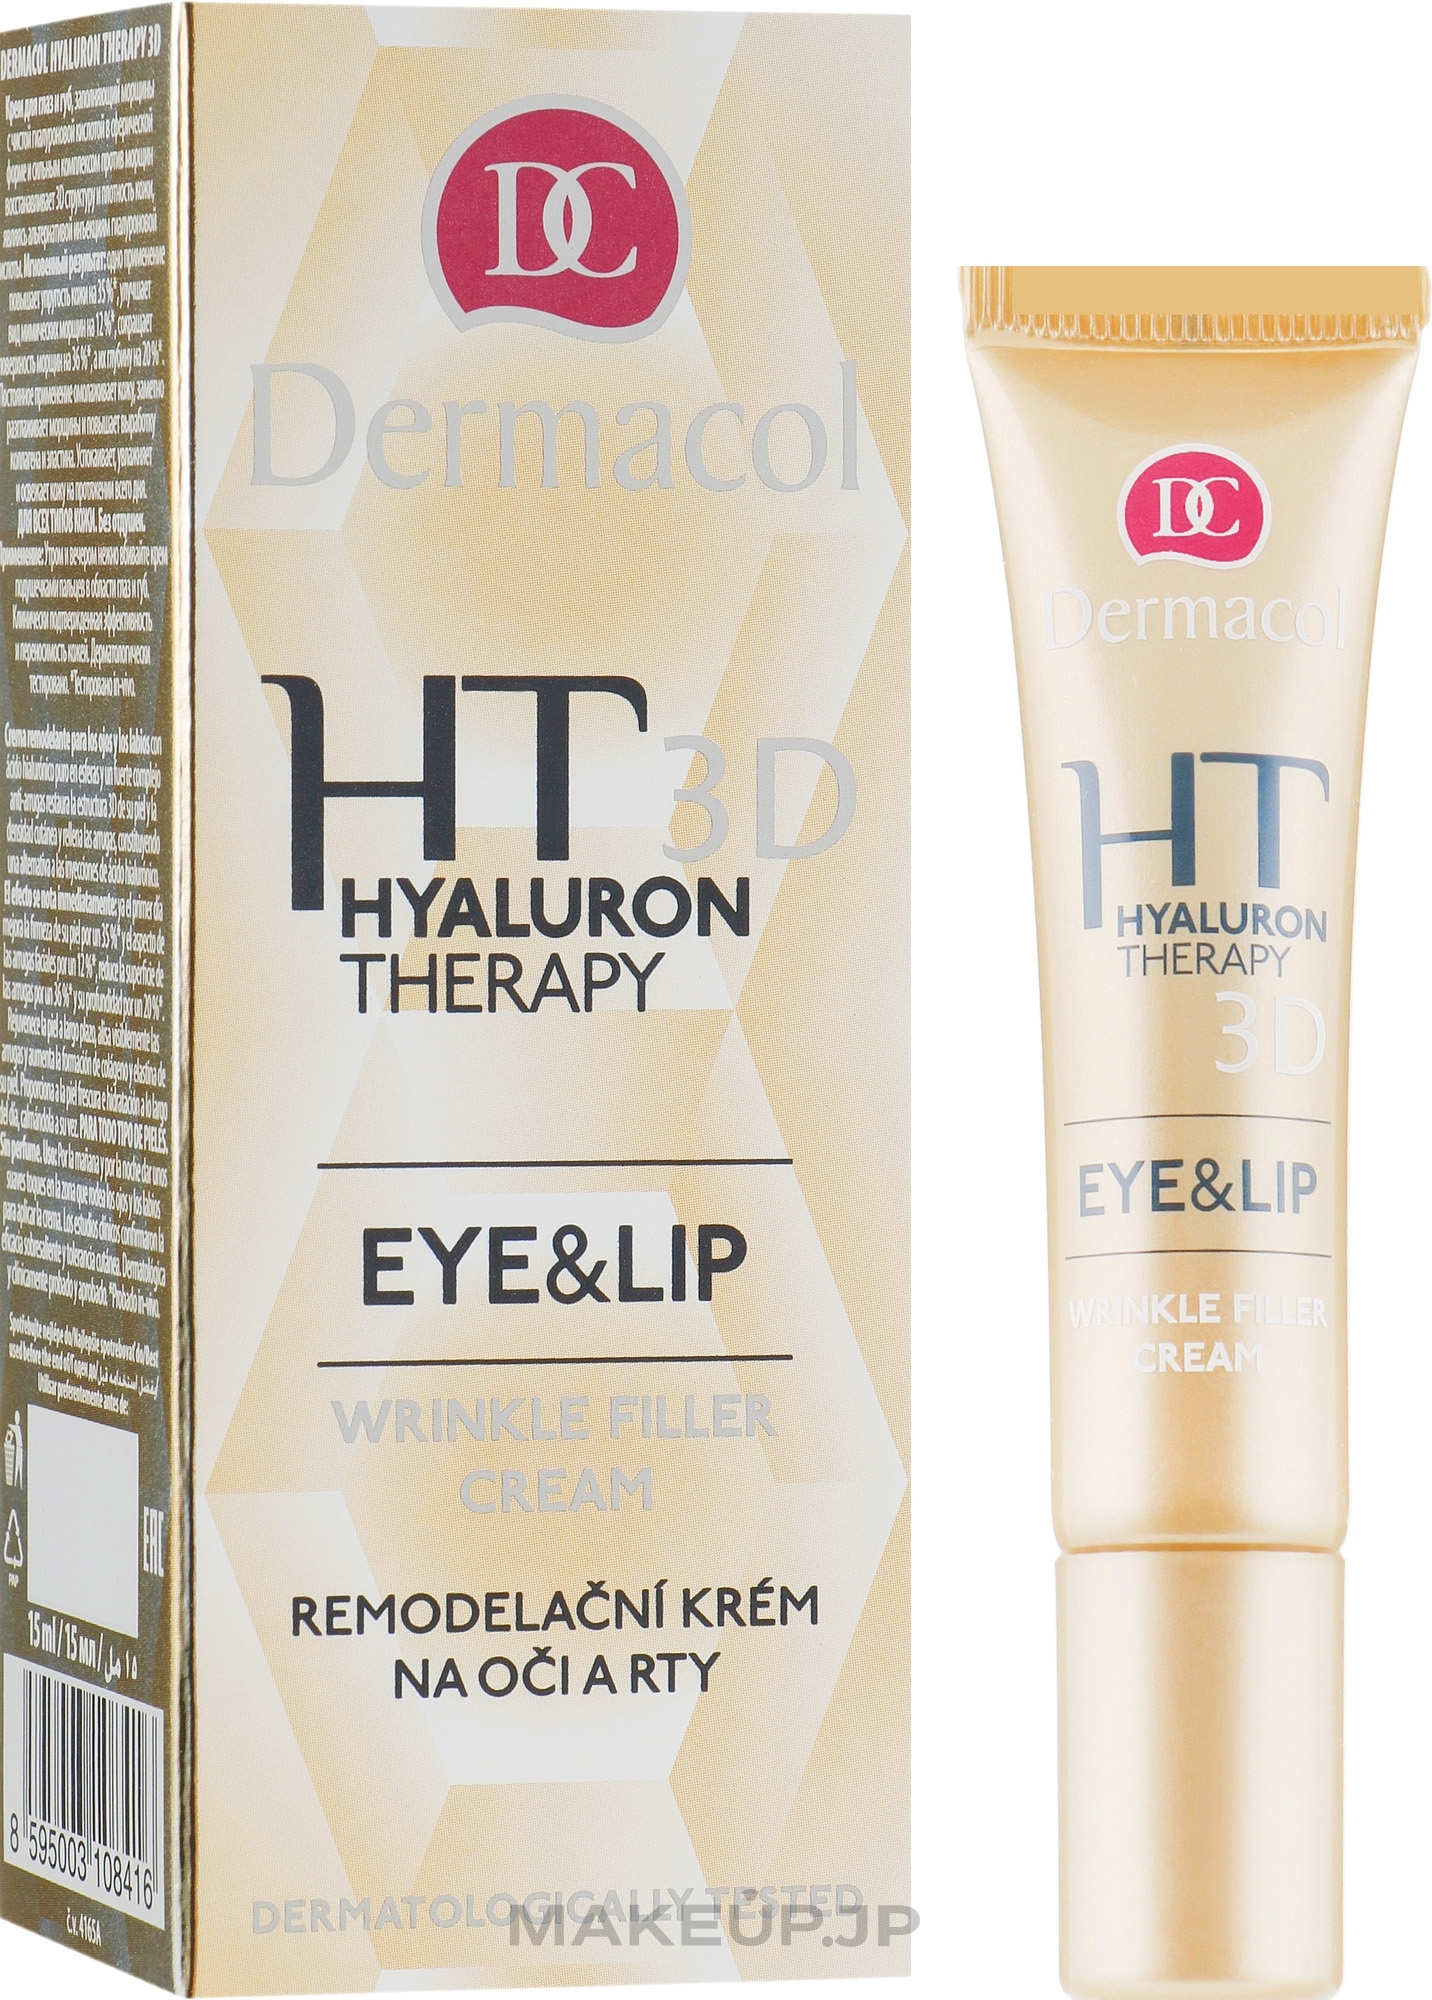 Eye and Lip Cream with Hyaluronic Acid - Dermacol Hyaluron Therapy 3D Eye and Lip Wrinkle Filler Cream — photo 15 ml